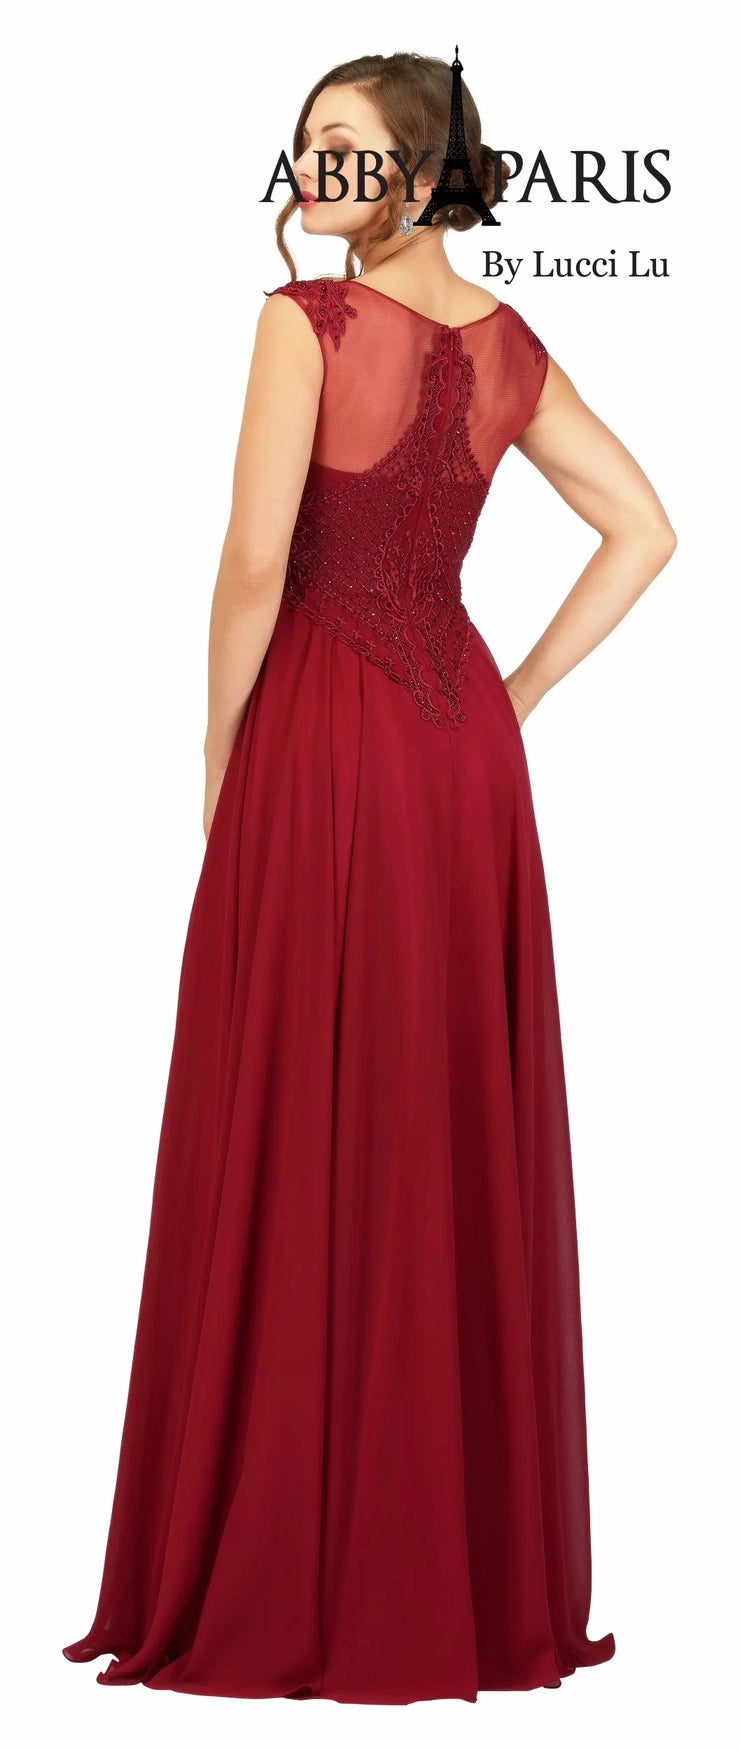 Abby Paris 96051W A-Line Chiffon Crew Neck Short Sleeve Embellished Bodice MOB Formal Gown. The Abby Paris 96051W A-Line Gown features a beautiful chiffon fabrication with a crew neck short sleeve top and an embellished bodice for an elegant look. Perfect for any formal occasion, this gown will make a statement and leave you feeling gorgeous.